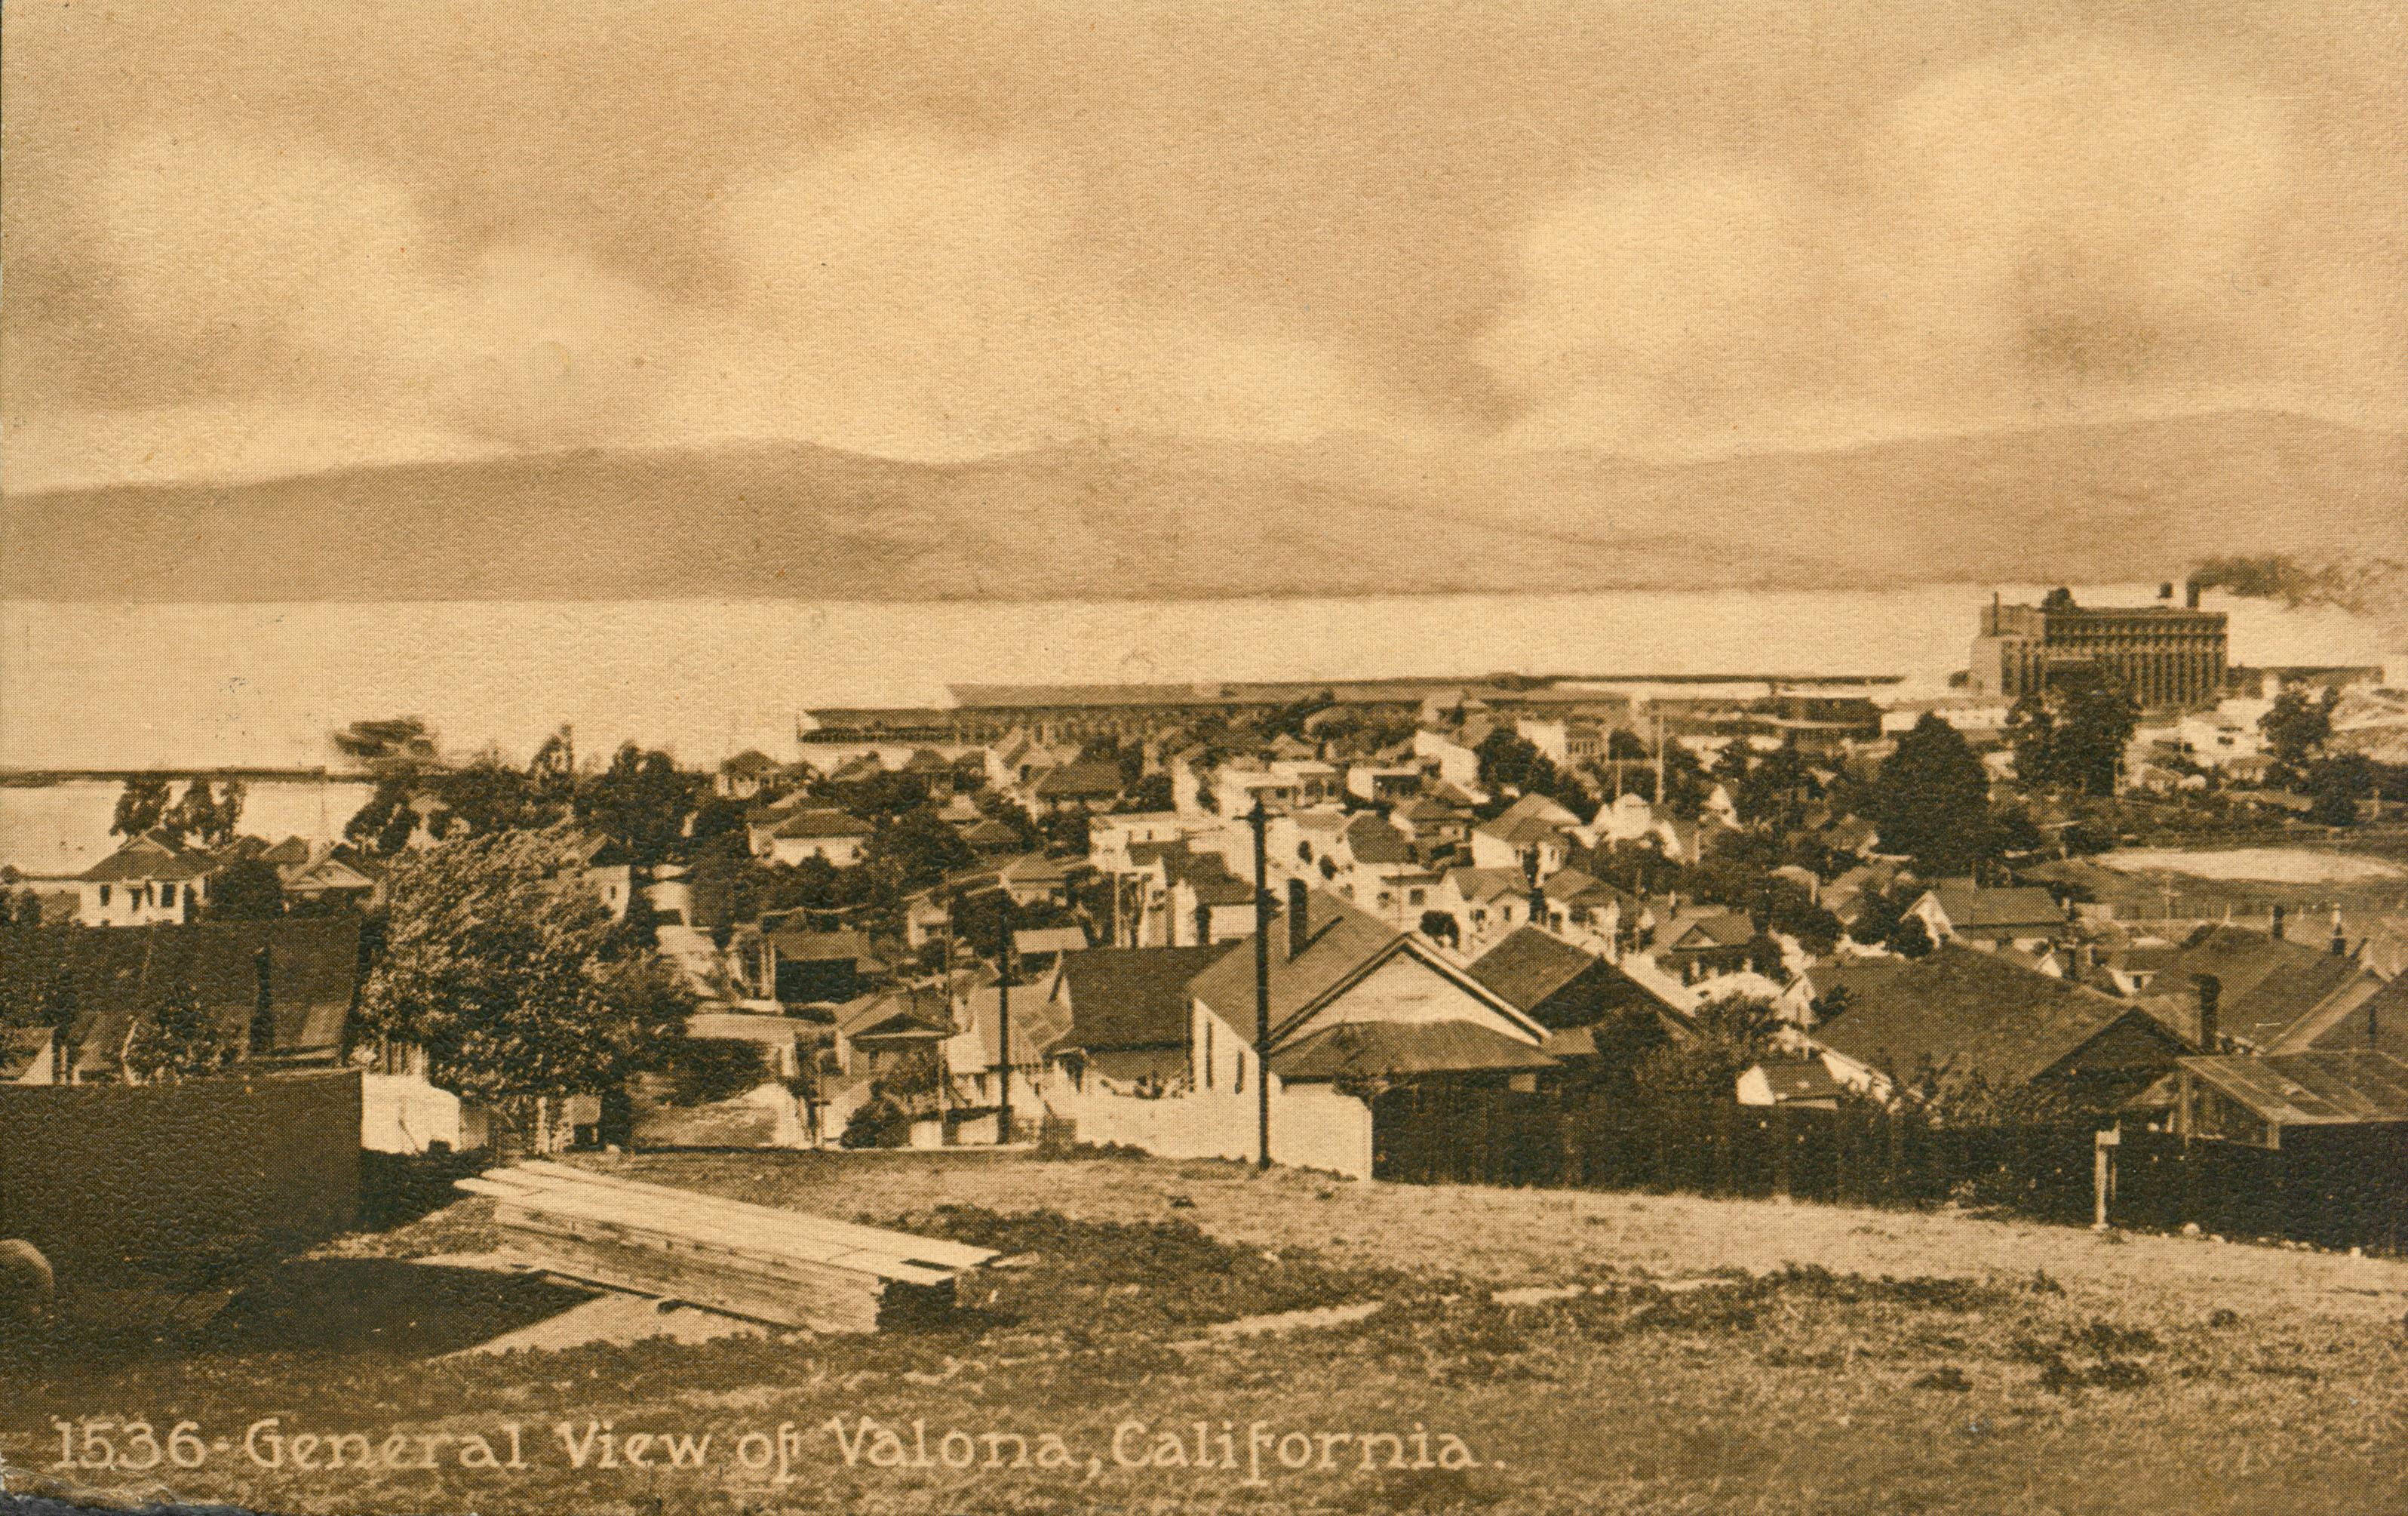 Bird's eye view of Valona with the Strait in the background